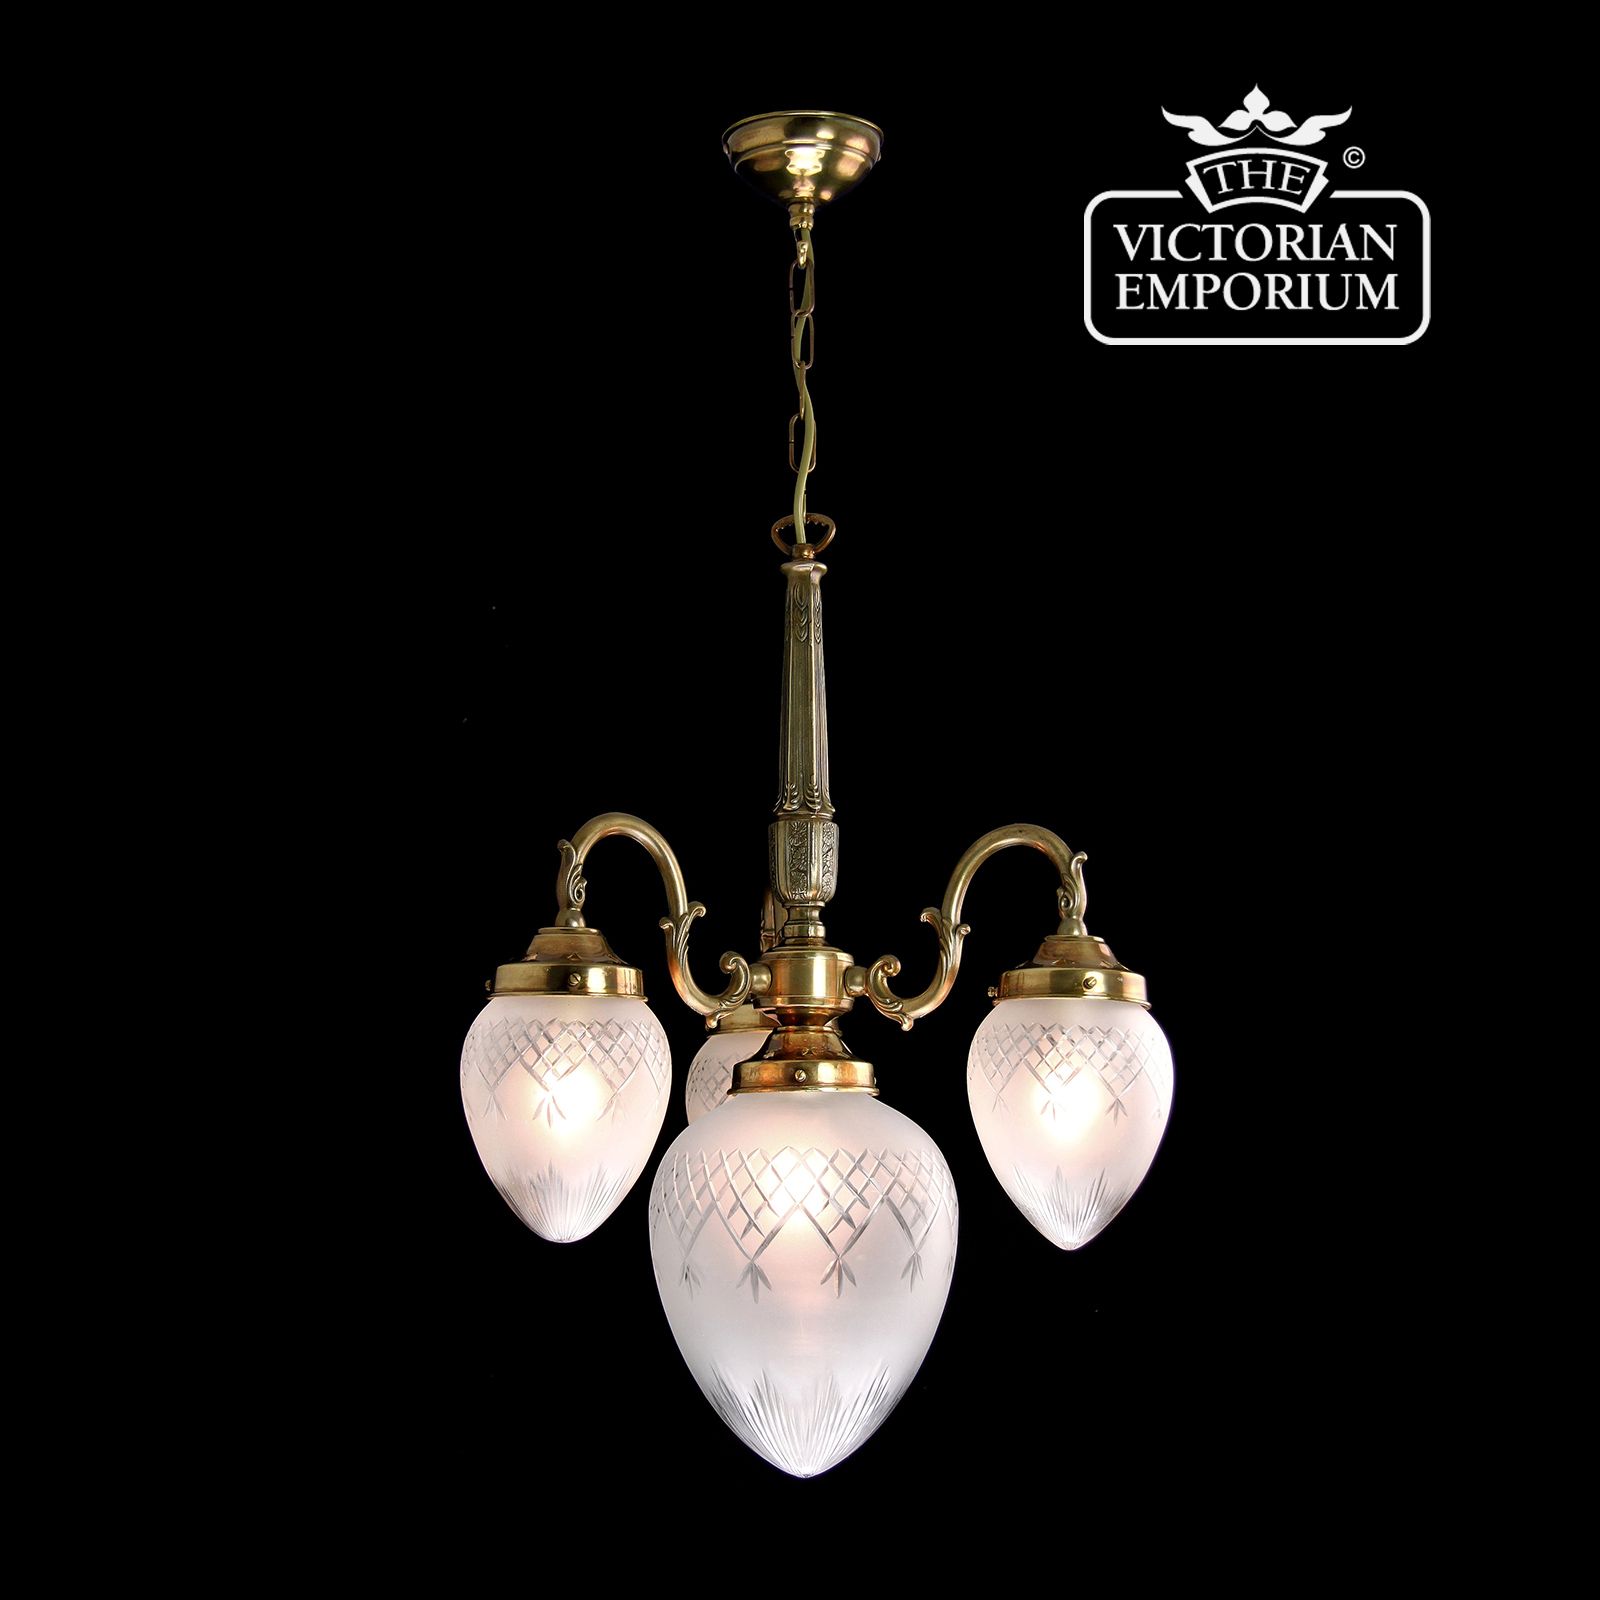 Pineapple cut glass four shade chandelier